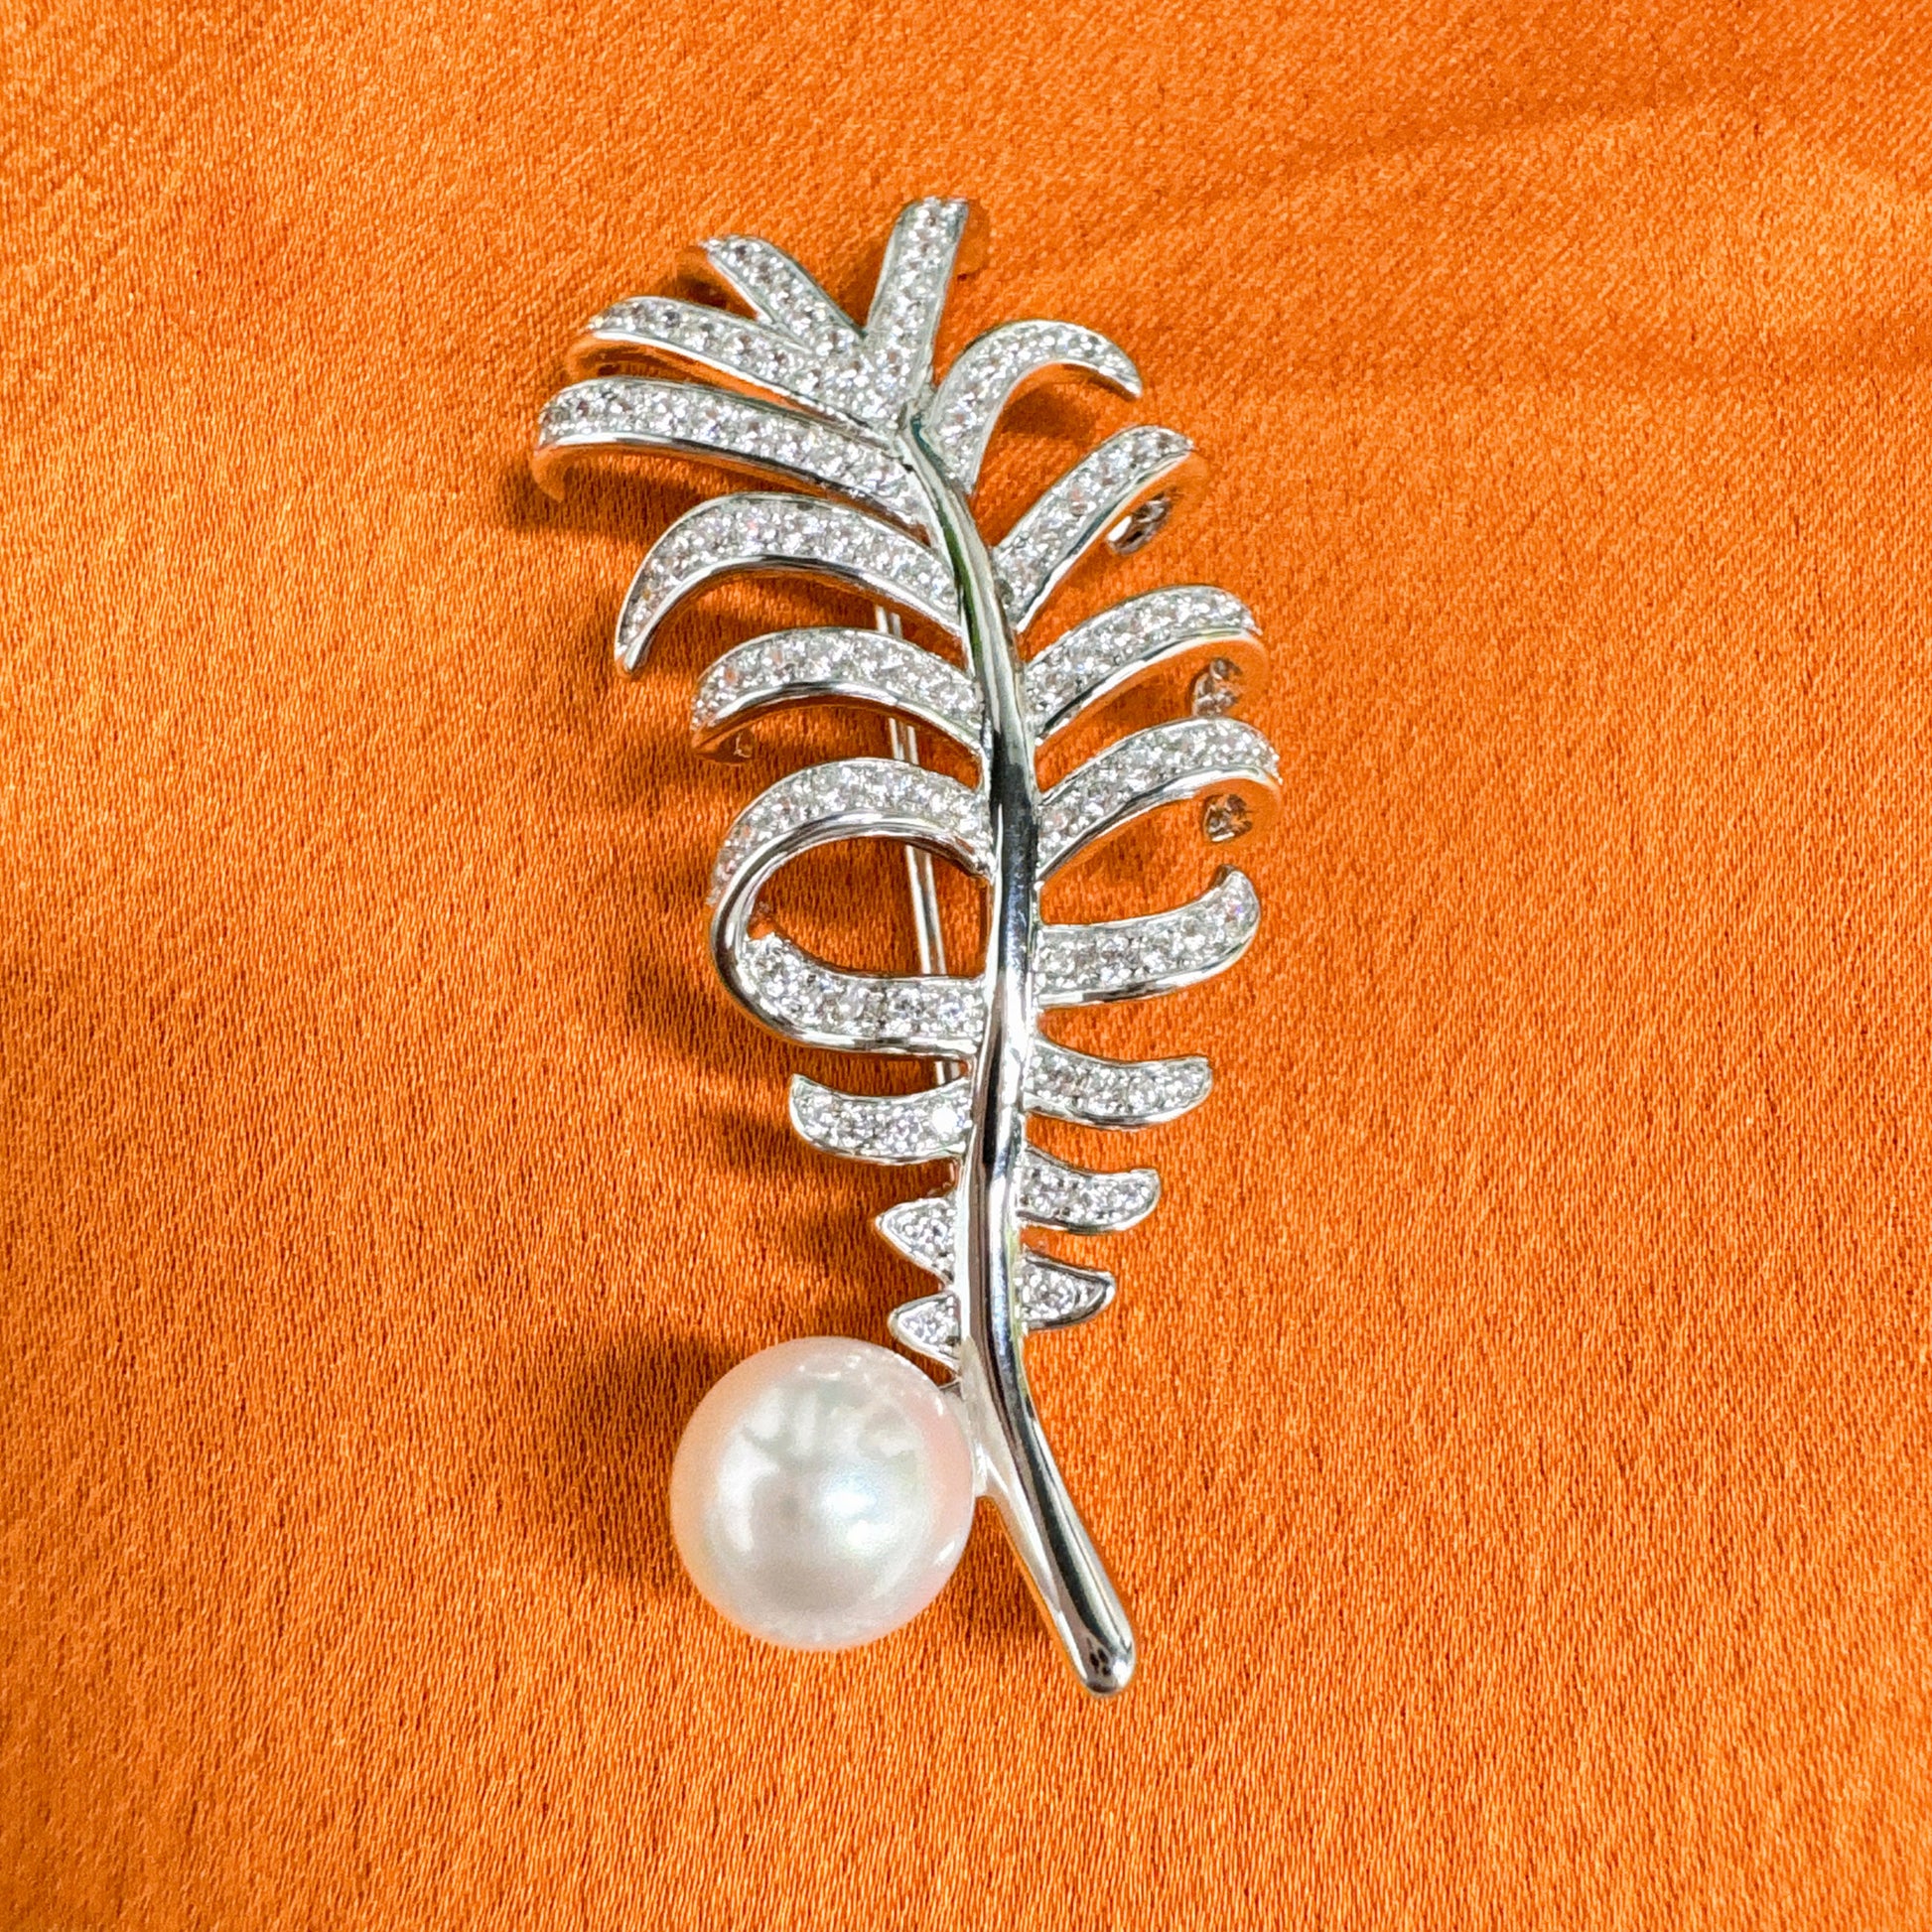 Handmade feather pearl brooch, women's brooches pins, jewelry ring, mother's day gifts, dress accessories,silver feathers broaches crafts DE-LIANG